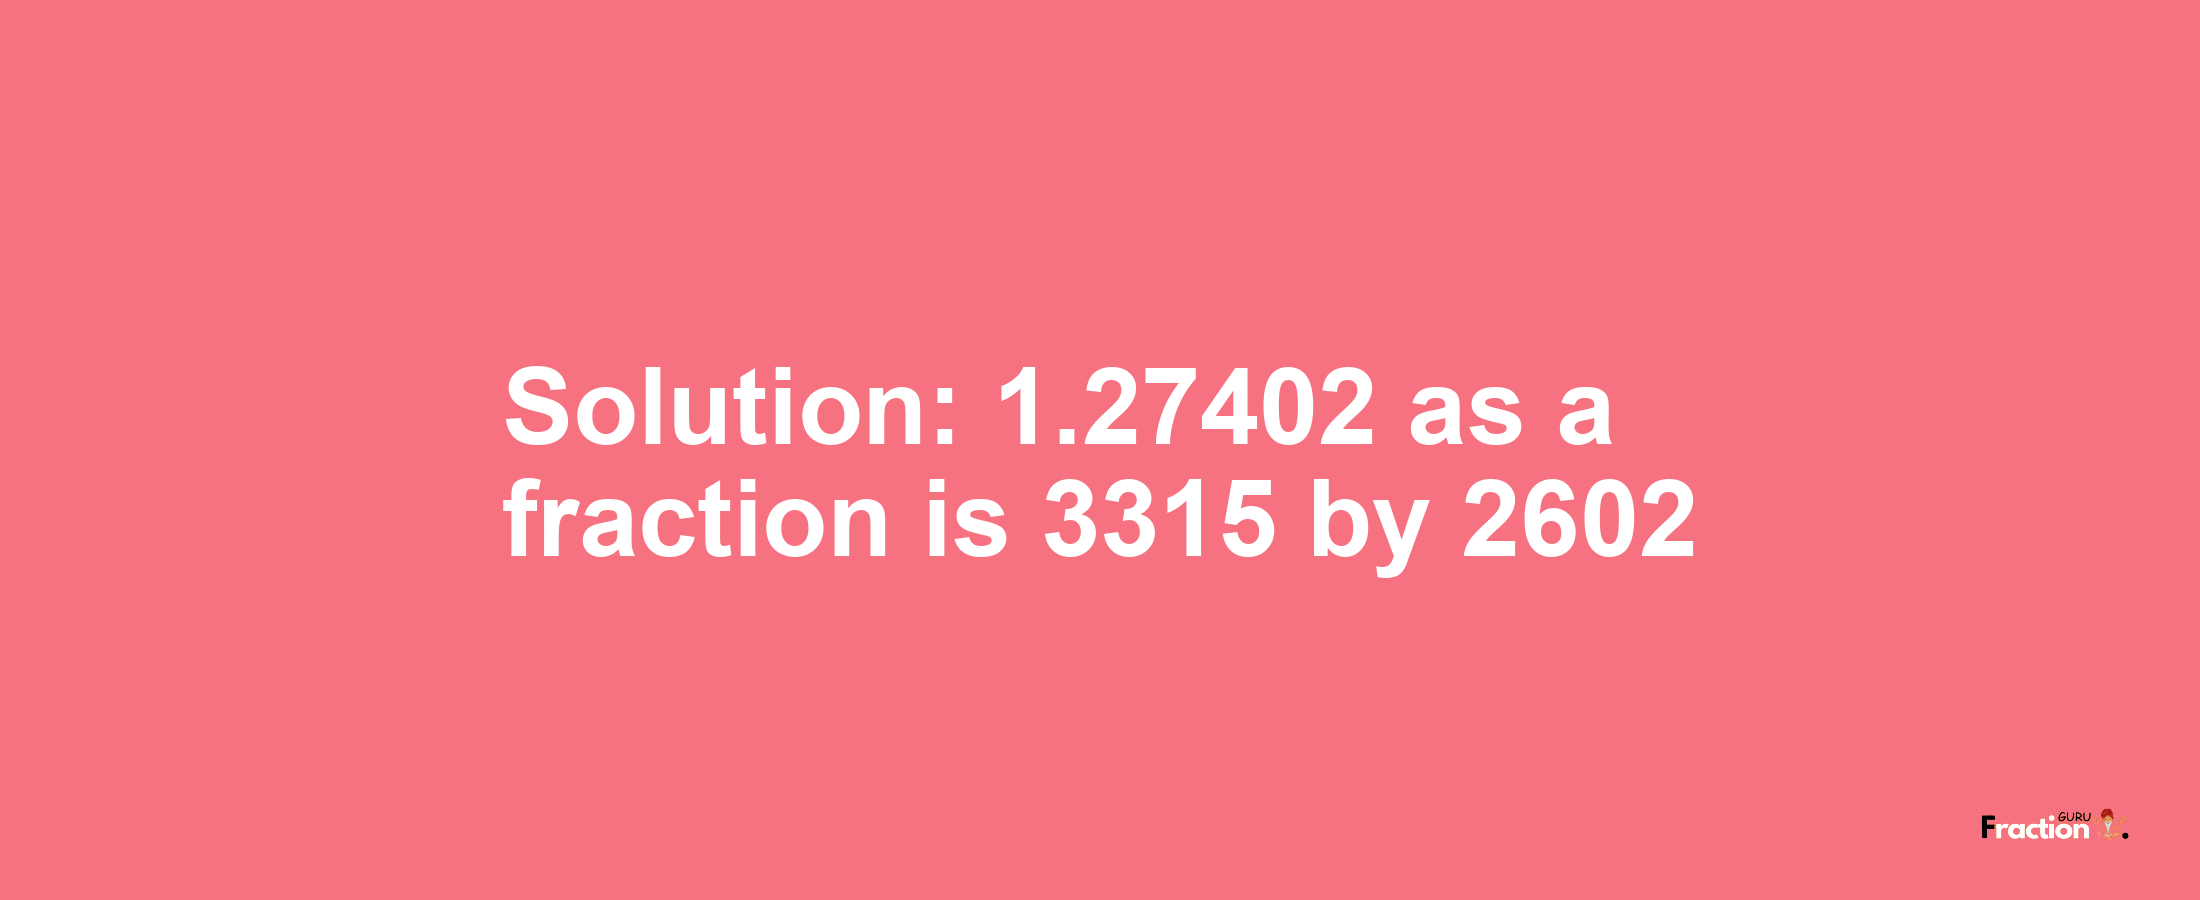 Solution:1.27402 as a fraction is 3315/2602